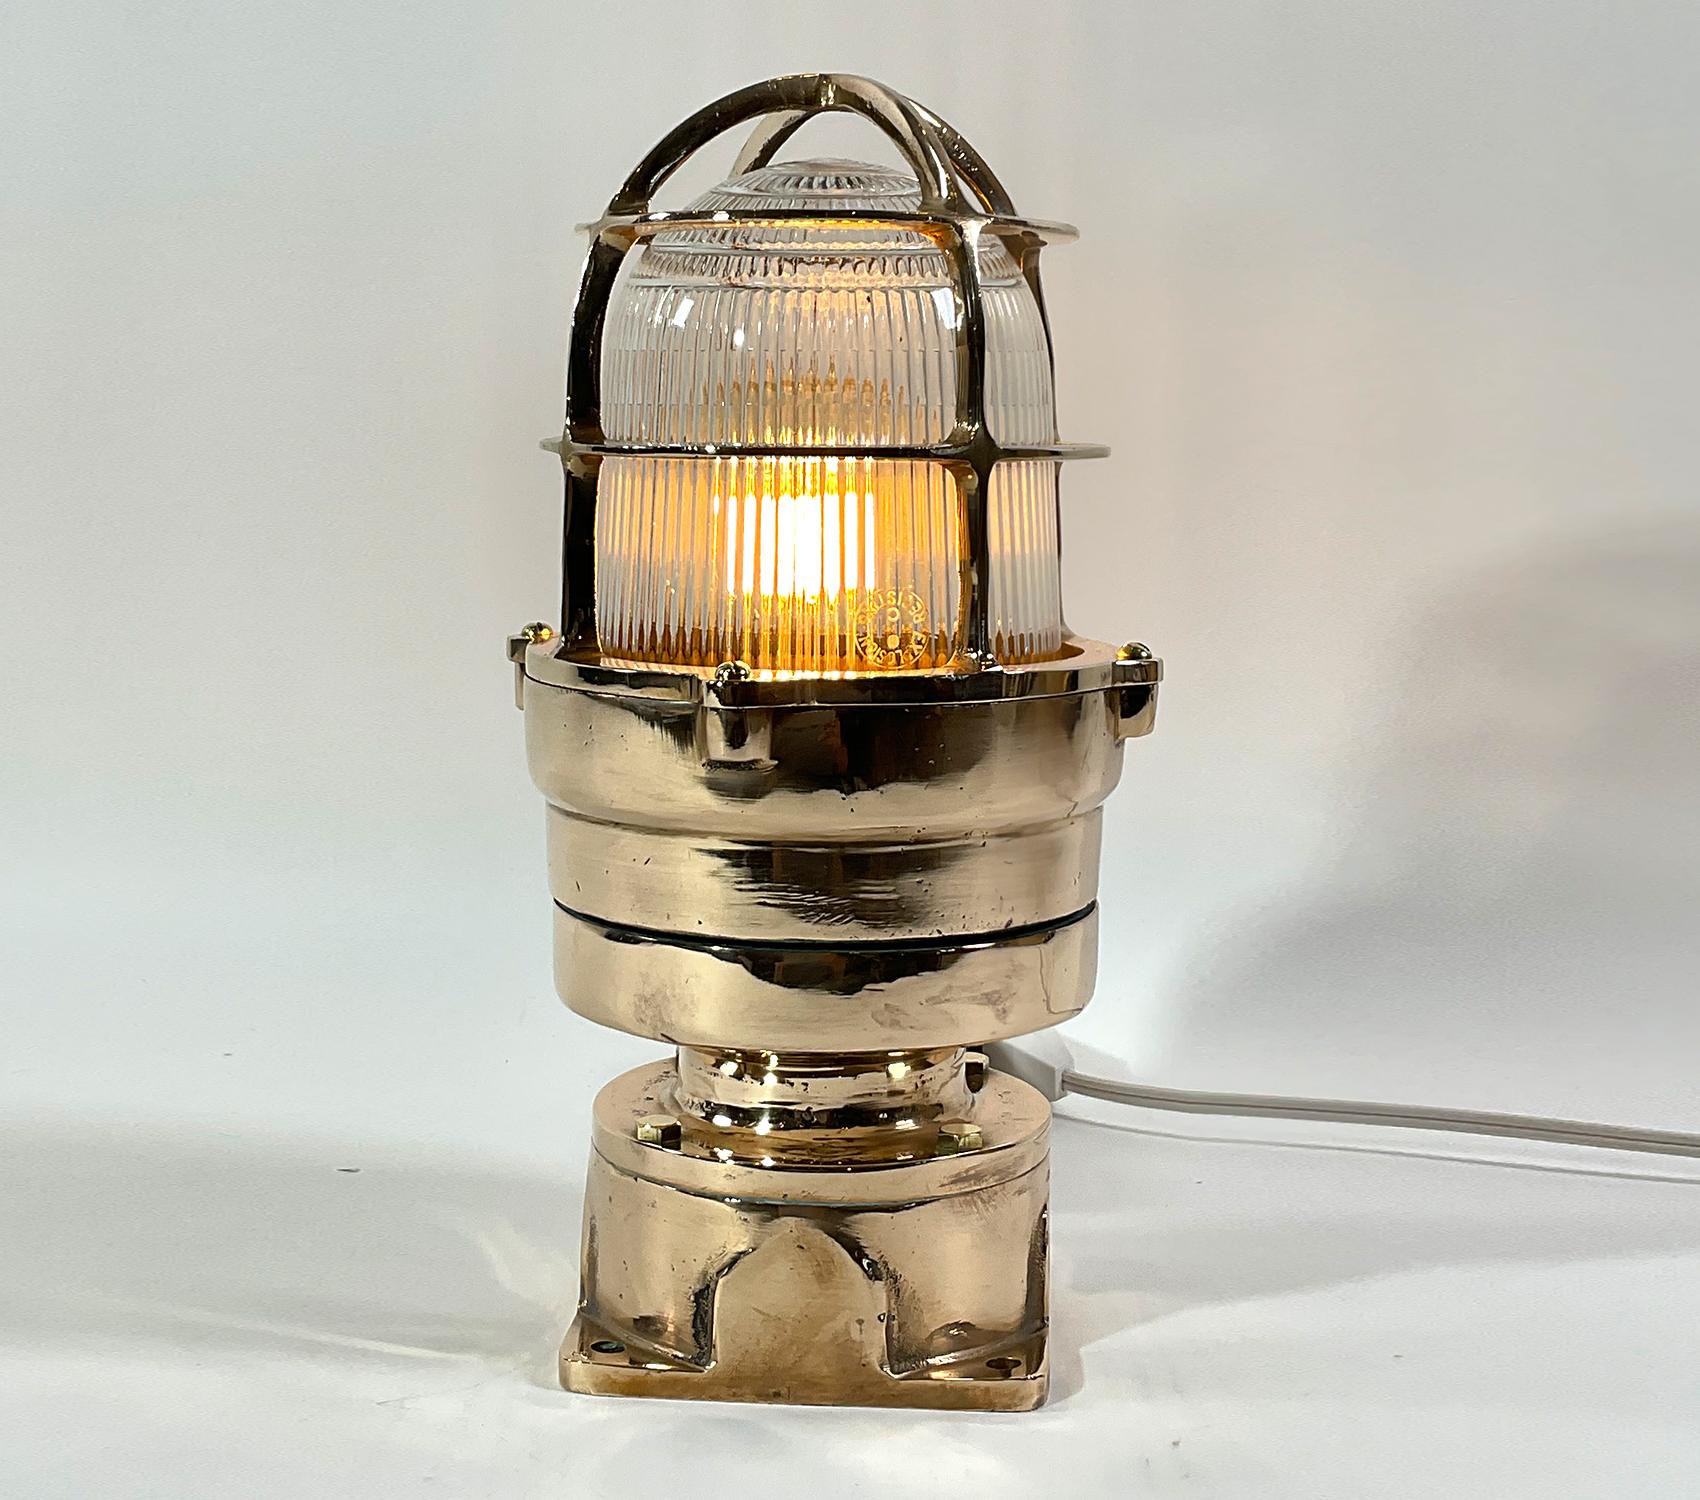 Brass marine beacon by Russel Stoll. Heavy brass ships explosion proof marine beacon. The Fresnel glass lens is protected by a heavy brass cage that is fastened to a sturdy columnar base with four flange. Circa 1960.